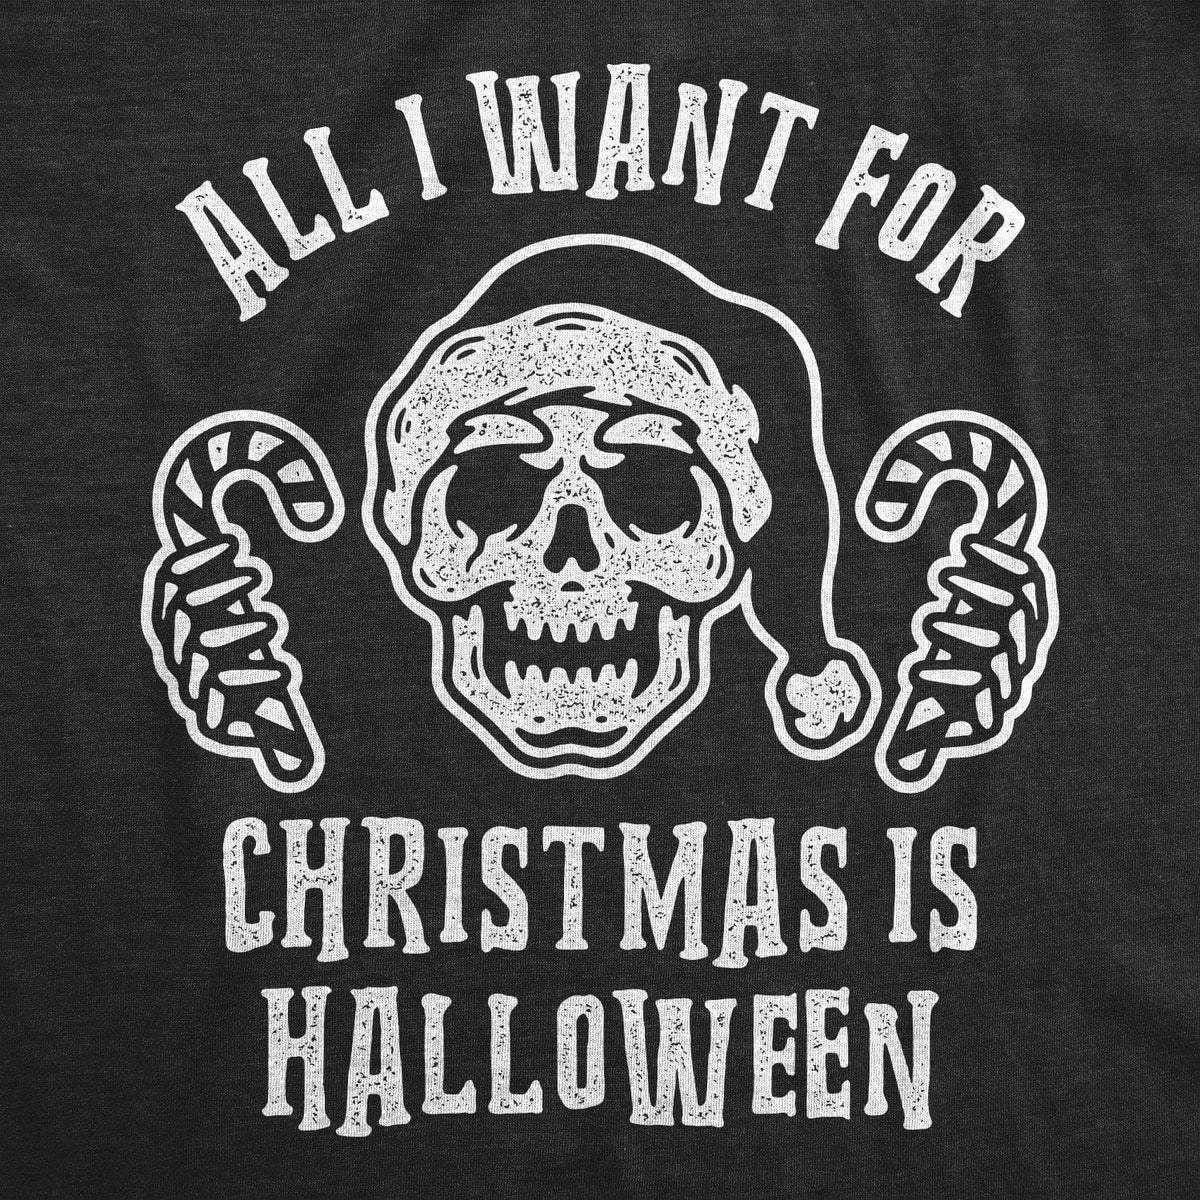 All I Want For Christmas Is Halloween Women&#39;s Tshirt - Crazy Dog T-Shirts